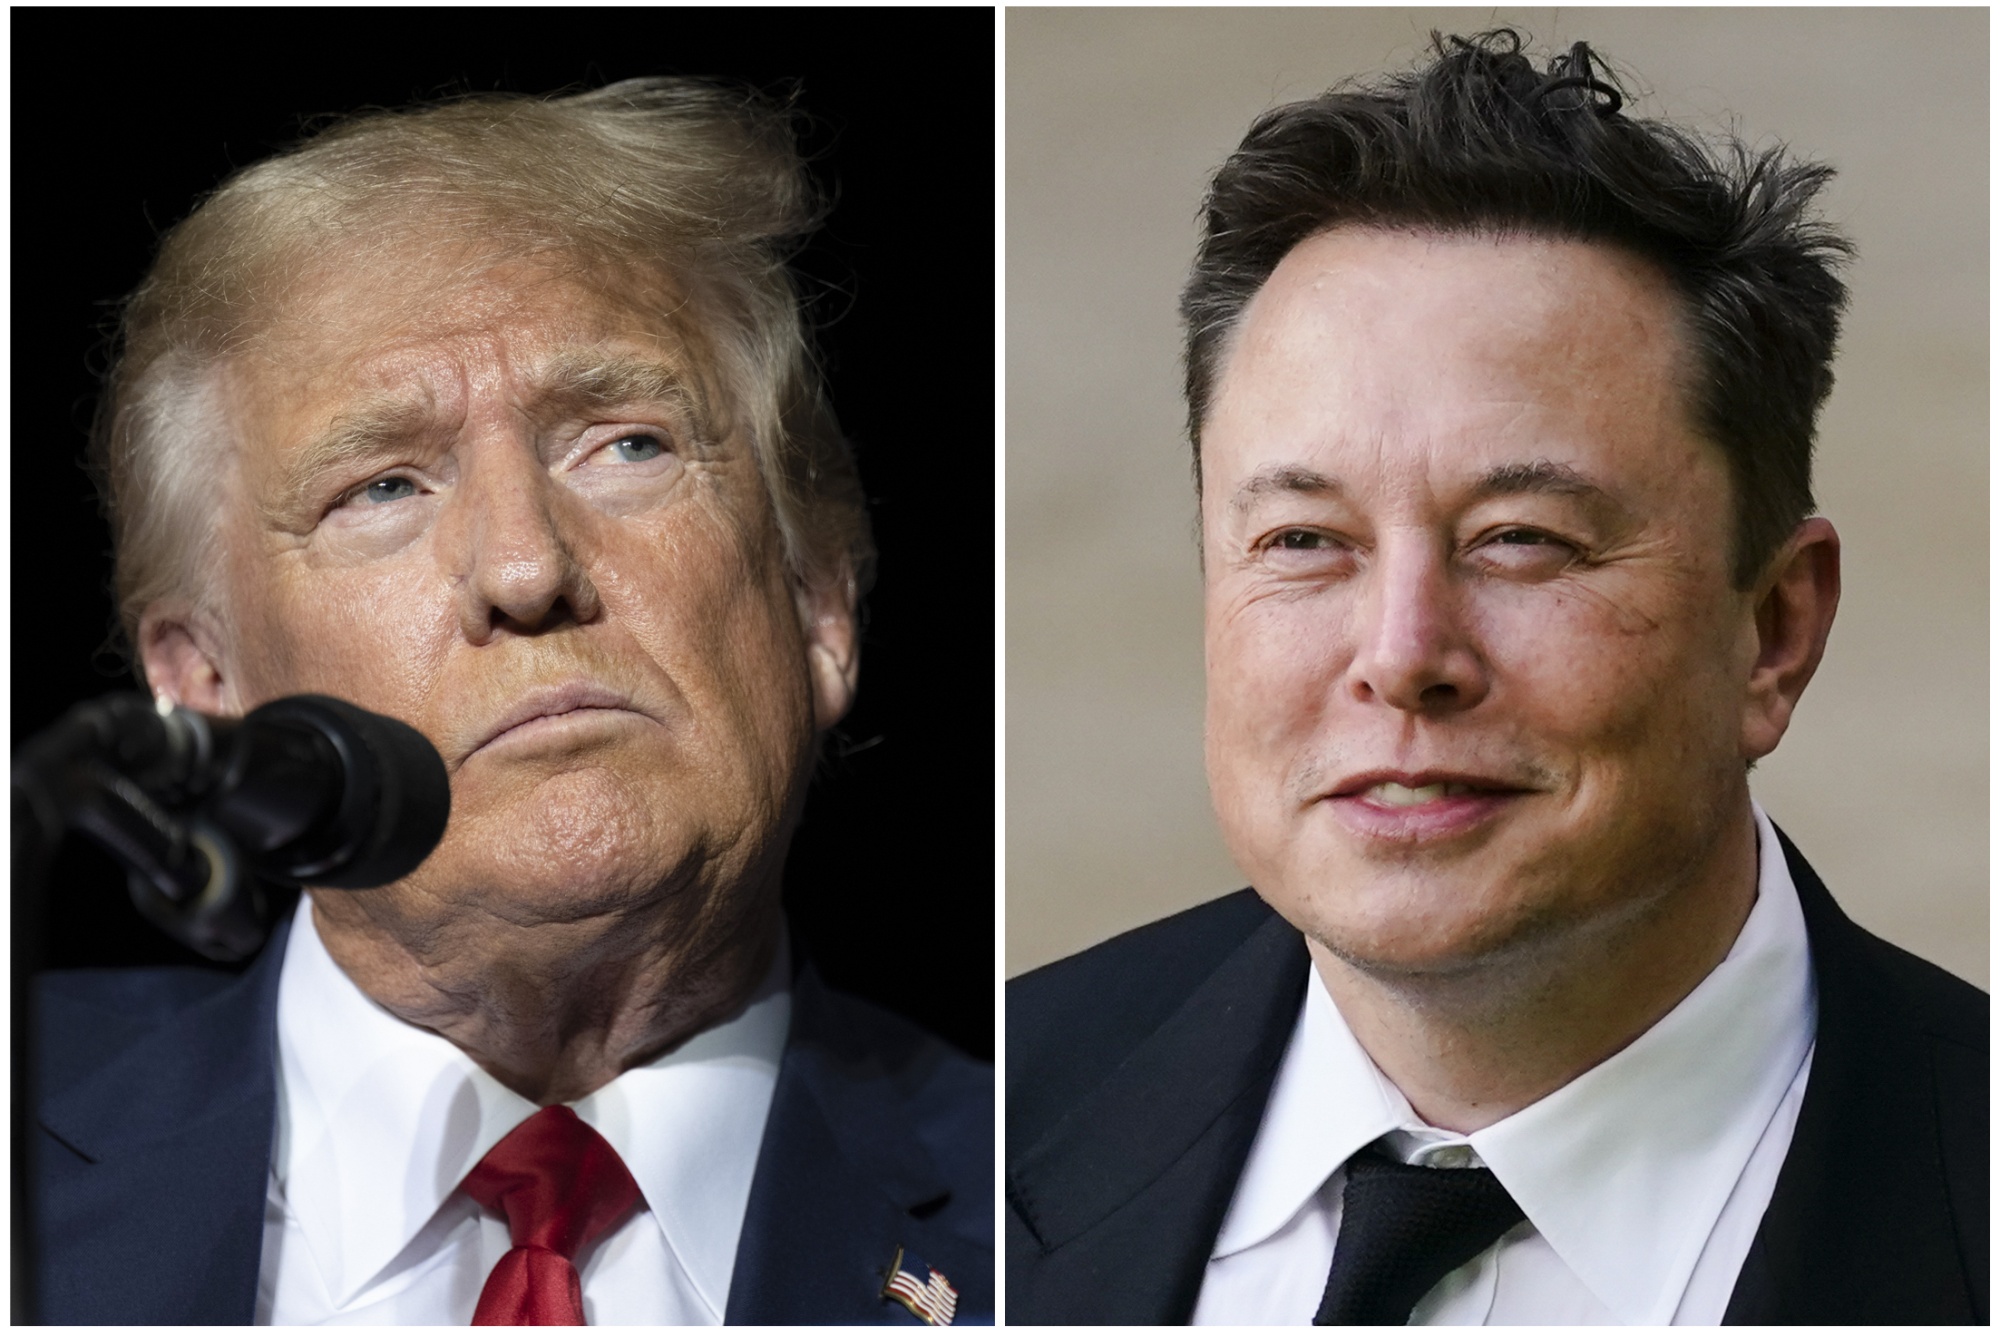 Transcript: Does Musk Have a Plan When It Comes to Trump? - Bloomberg